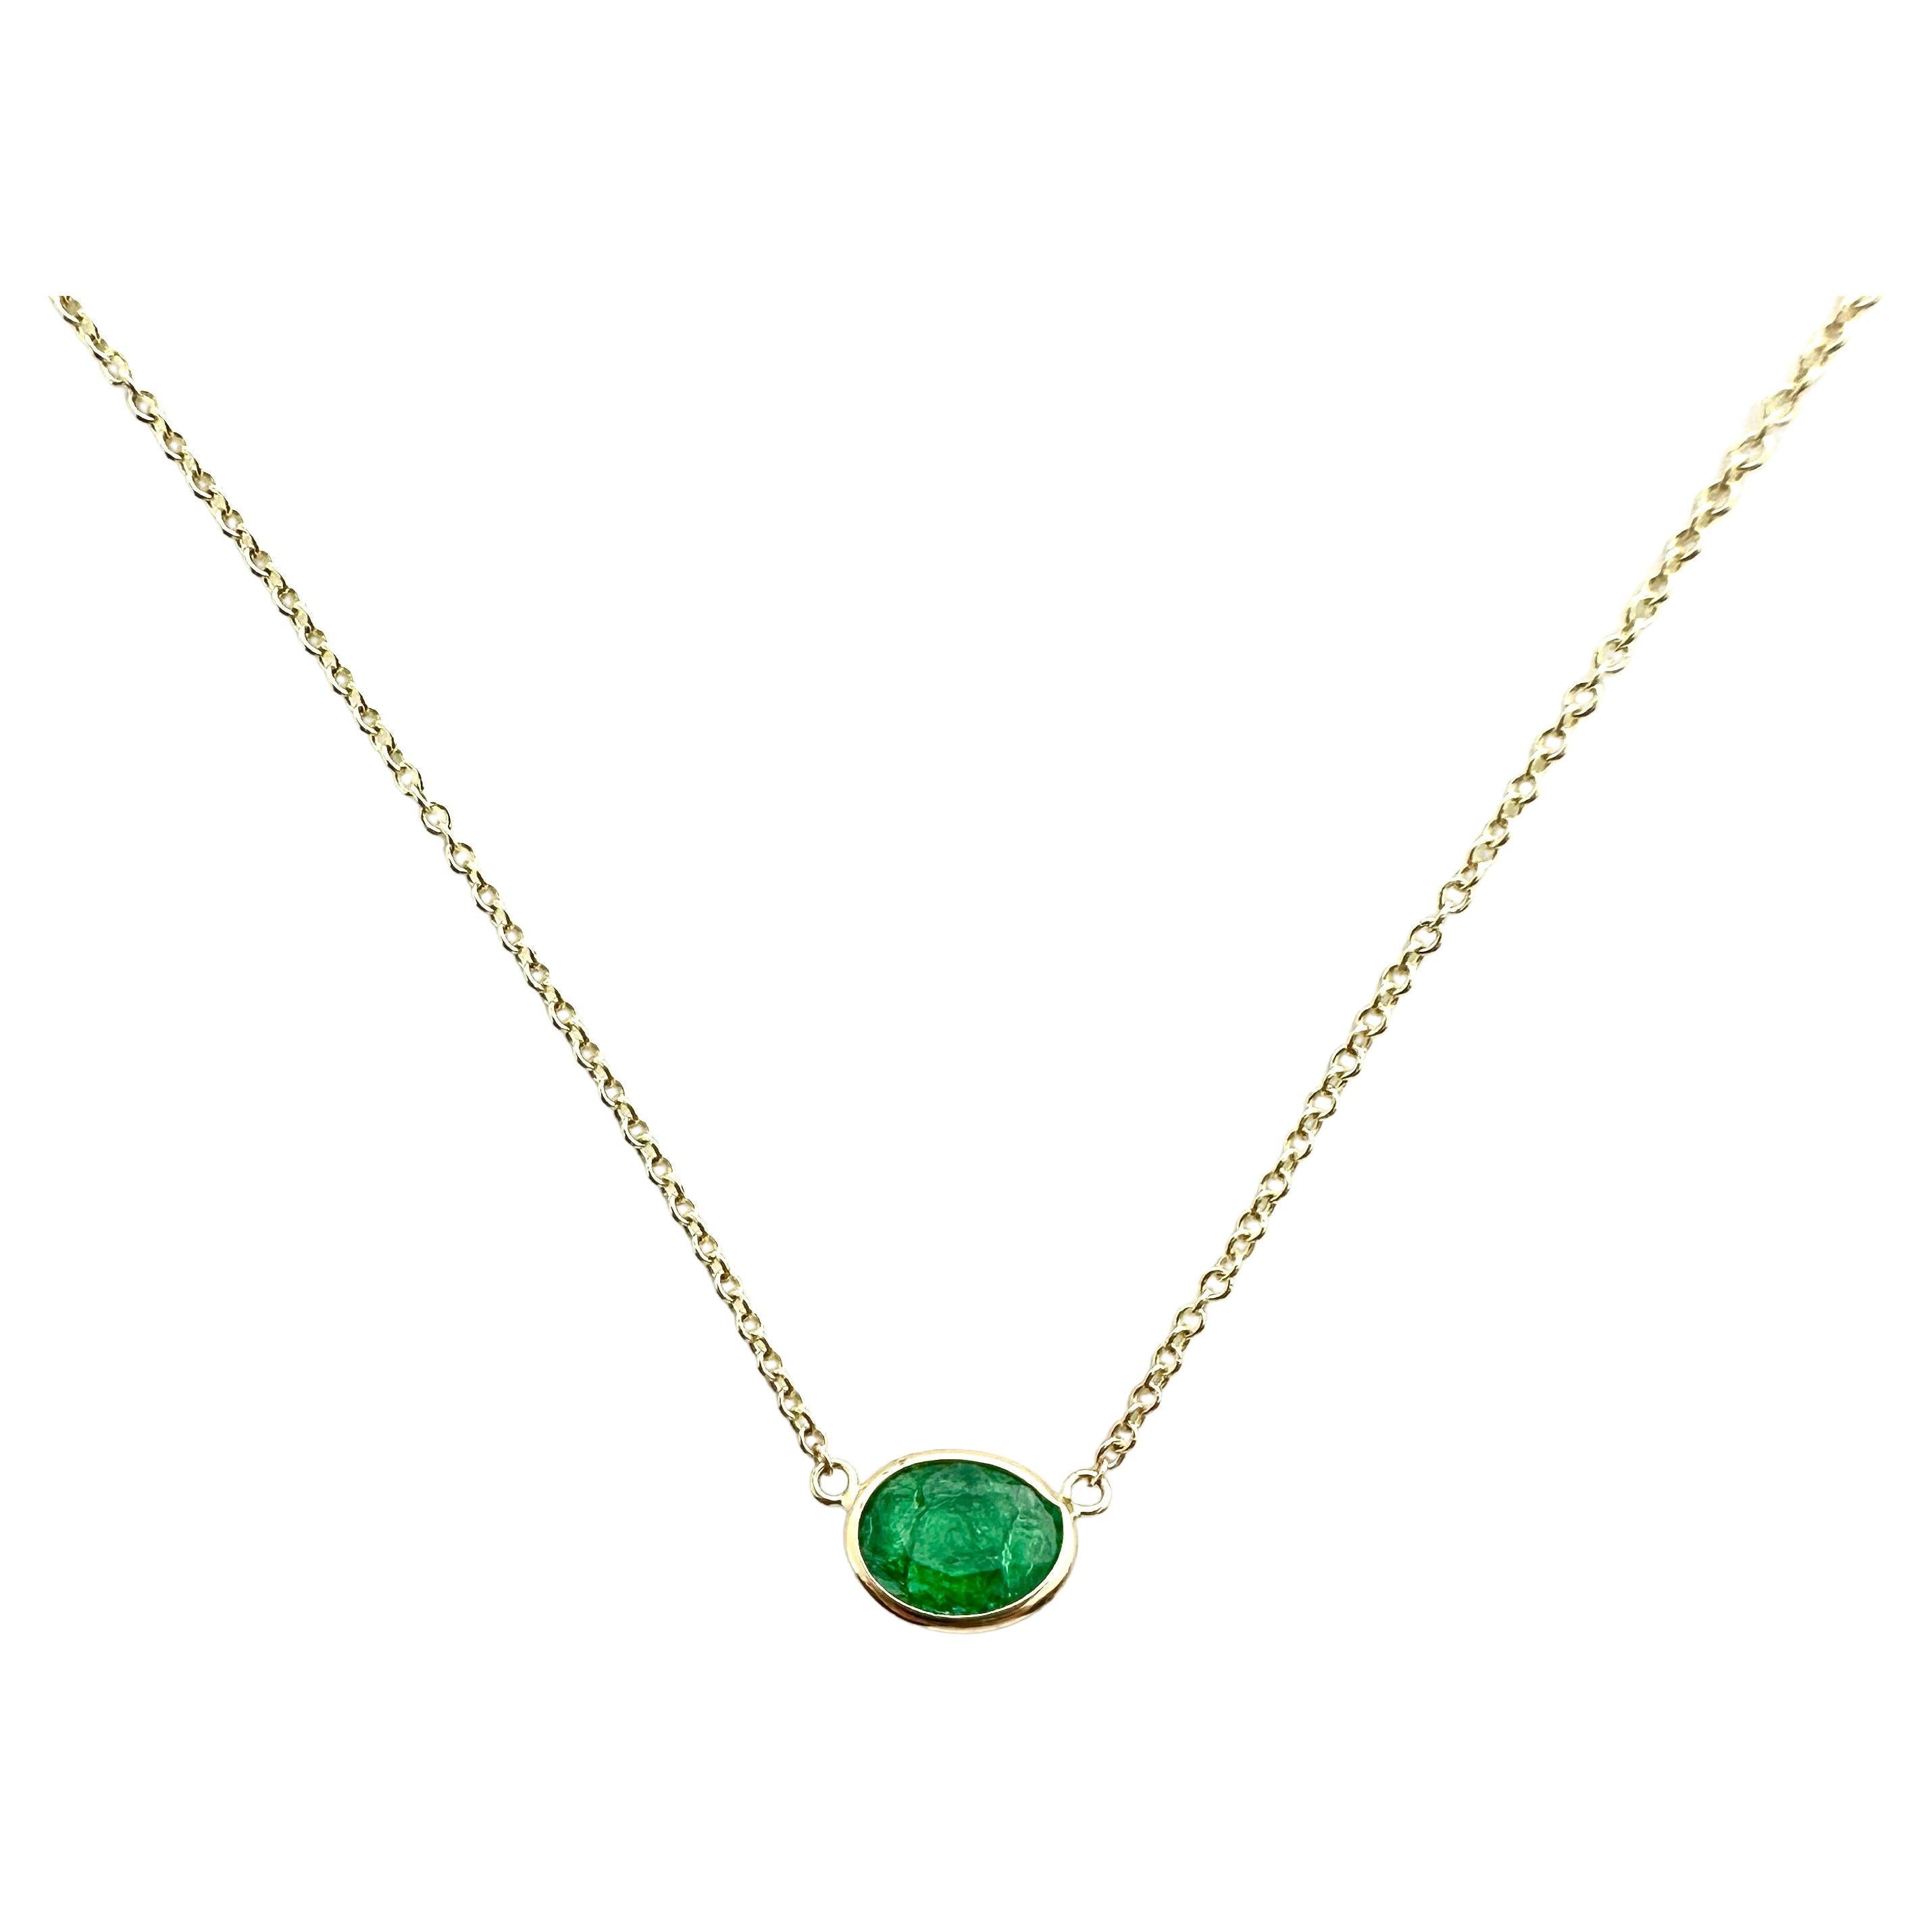 1.32 Carat Weight Green Emerald Oval Cut Solitaire Necklace in 14k Yellow Gold For Sale